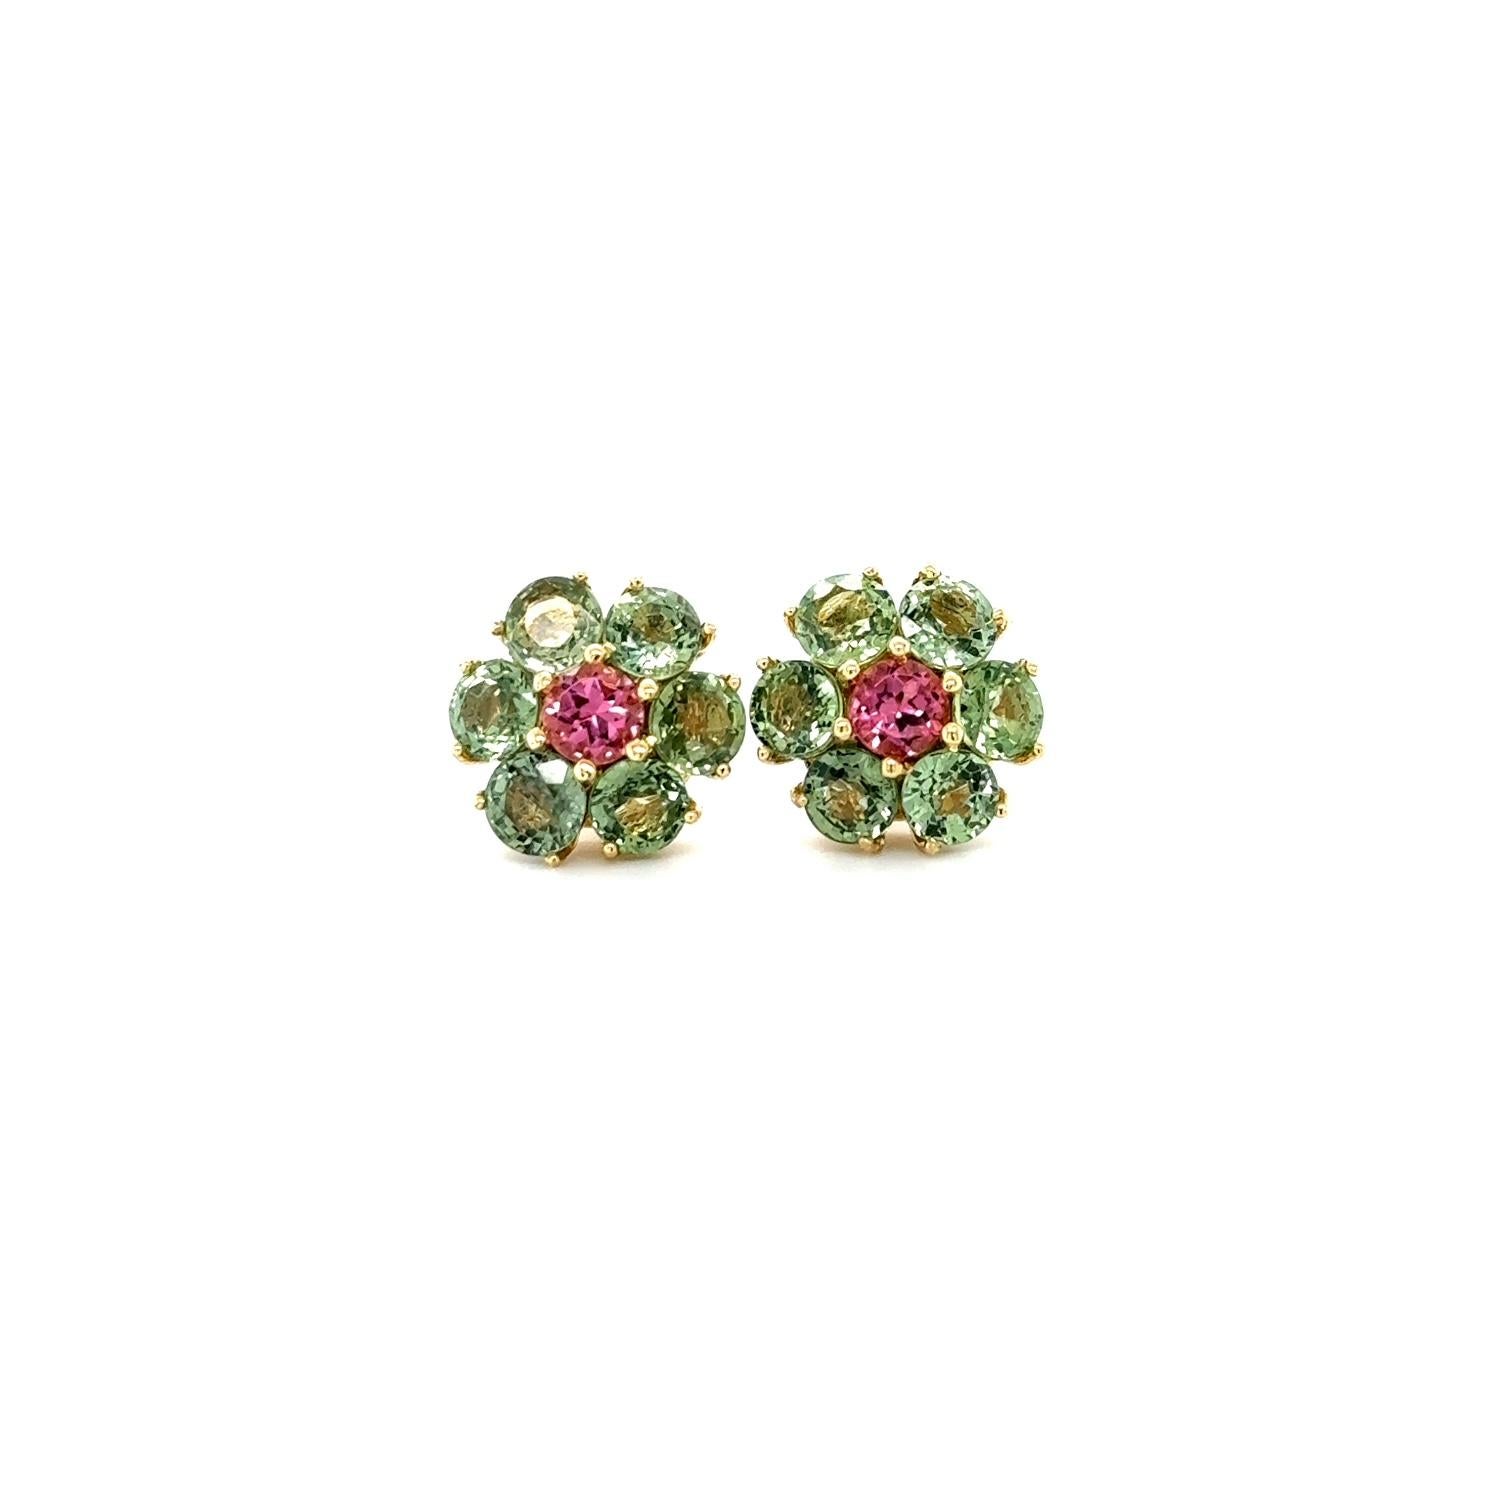 5.50 Carat Round Cut Natural Sapphire Tourmaline Yellow Gold Stud Earrings
Cute, dainty earrings that are versatile and great for an everyday look! 


There are 12 Green Sapphires  that weigh 4.96 carats and 2 Pink Tourmalines that weigh 0.54 carats